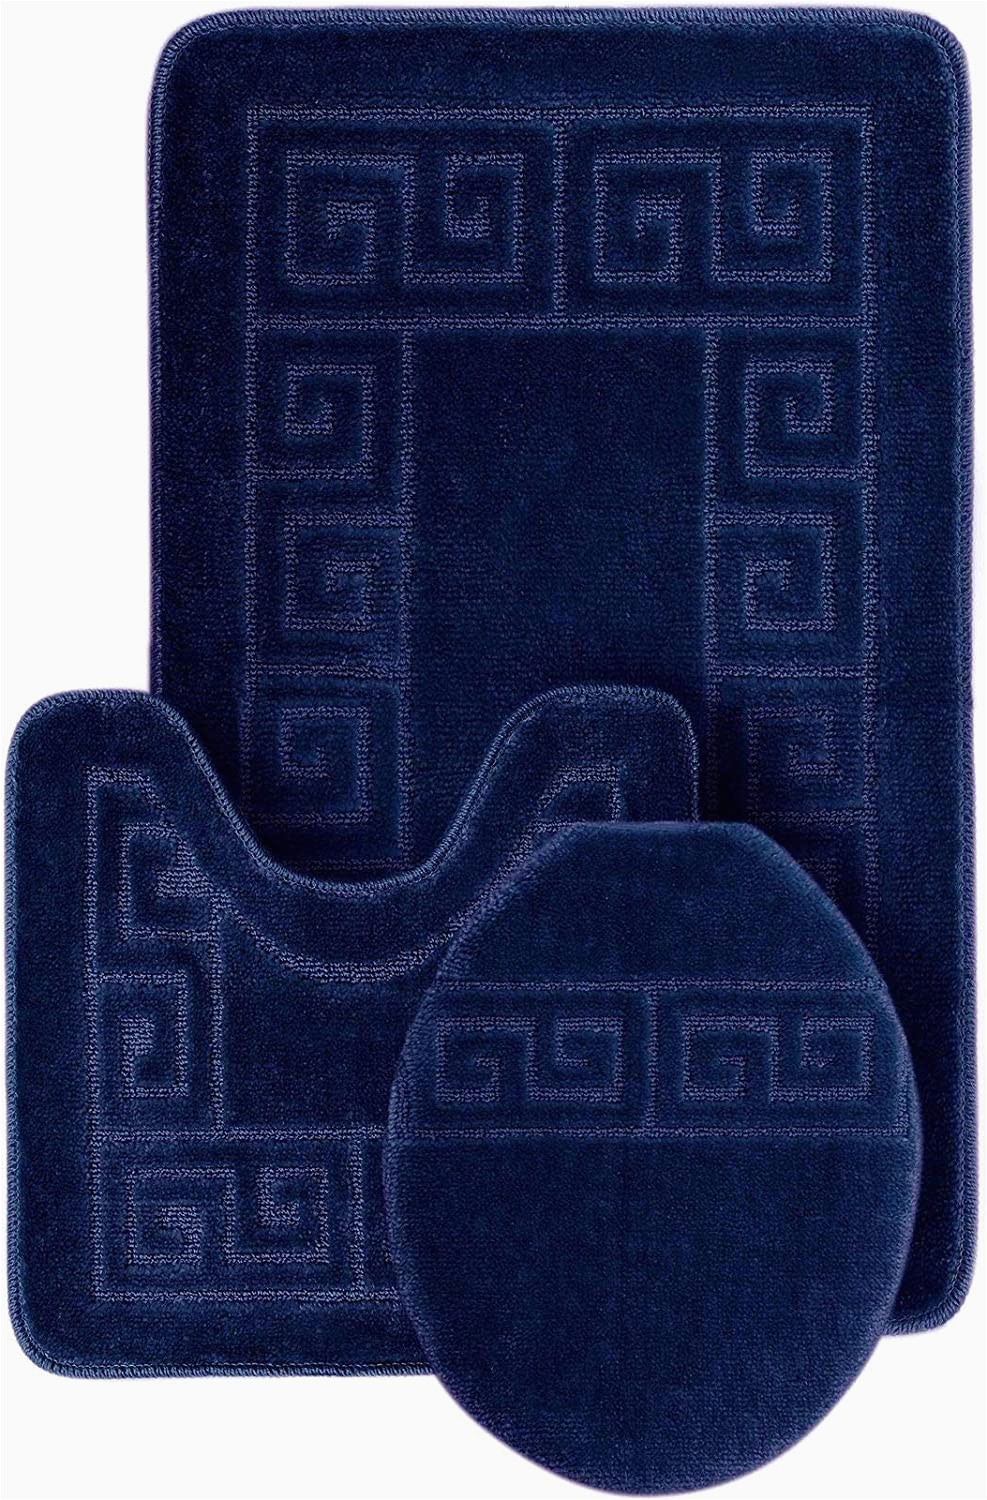 Discount Bathroom Rug Sets Wpm World Products Mart Bathroom Rugs Set 3 Piece Bath Pattern Rug 20"x32" Contour Mats 20"x20" with Lid Cover Navy